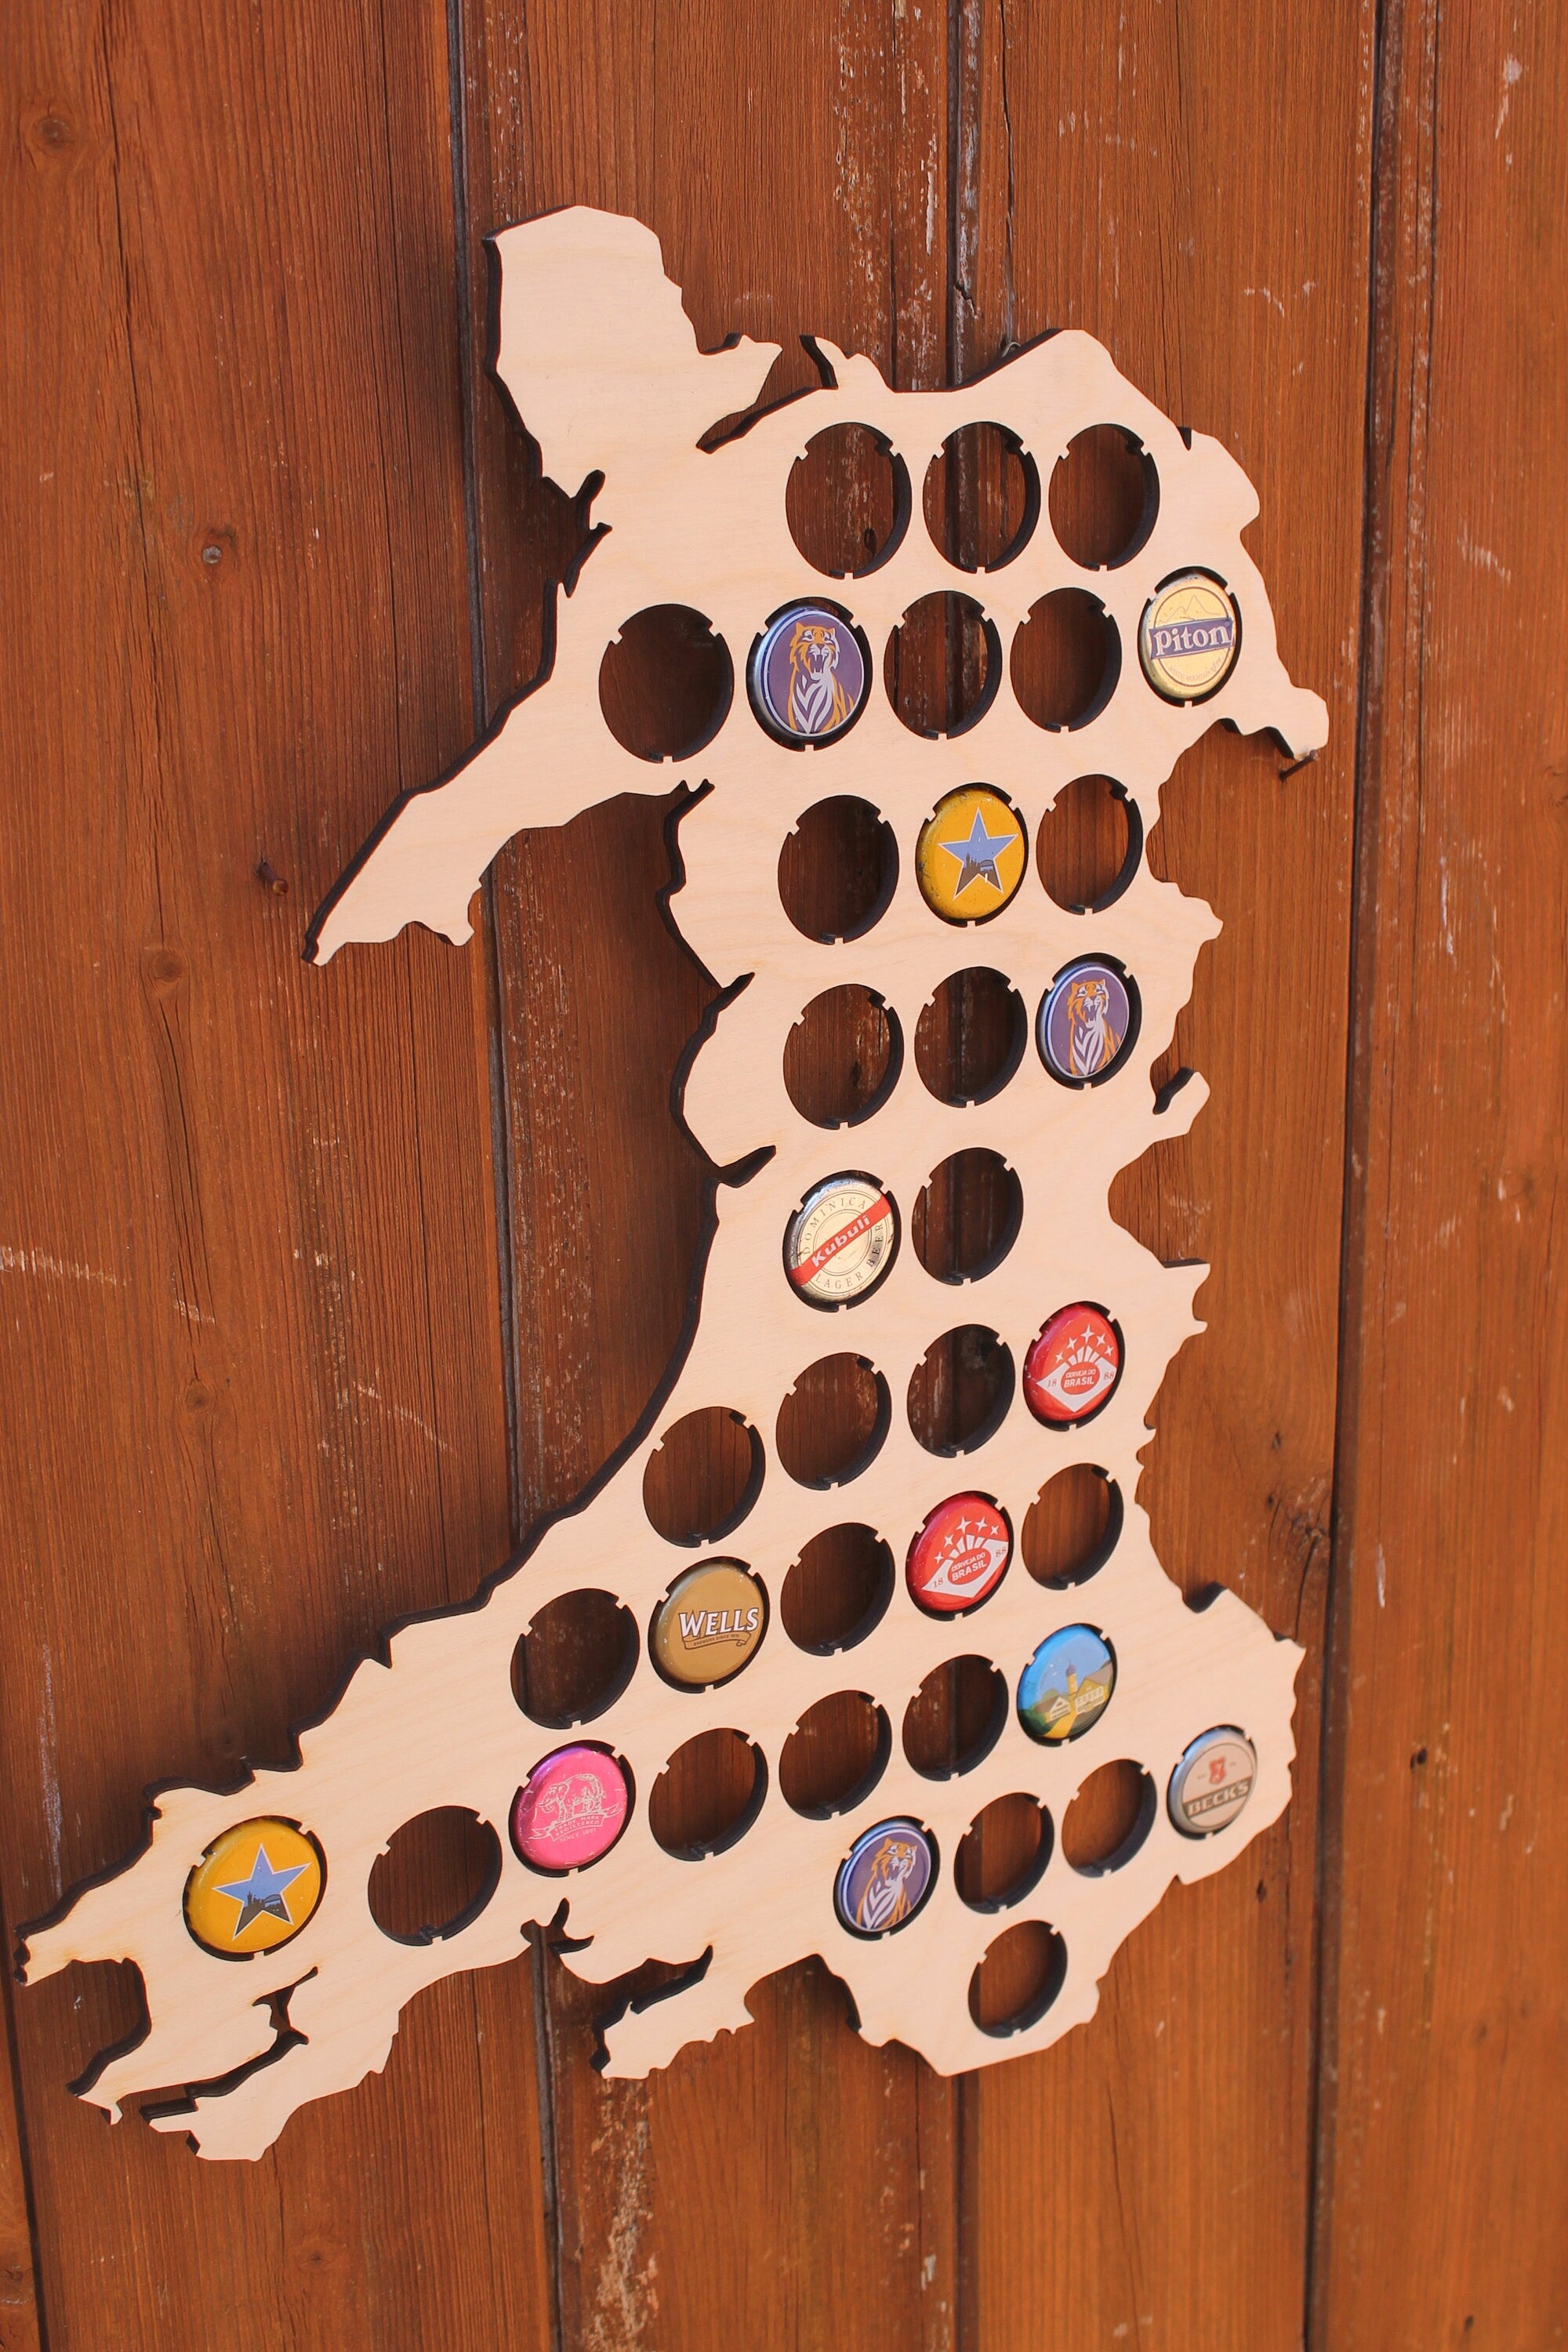 Wales Beer Cap Map Bottle Cap Map Collection Beer Cap Gift for Him